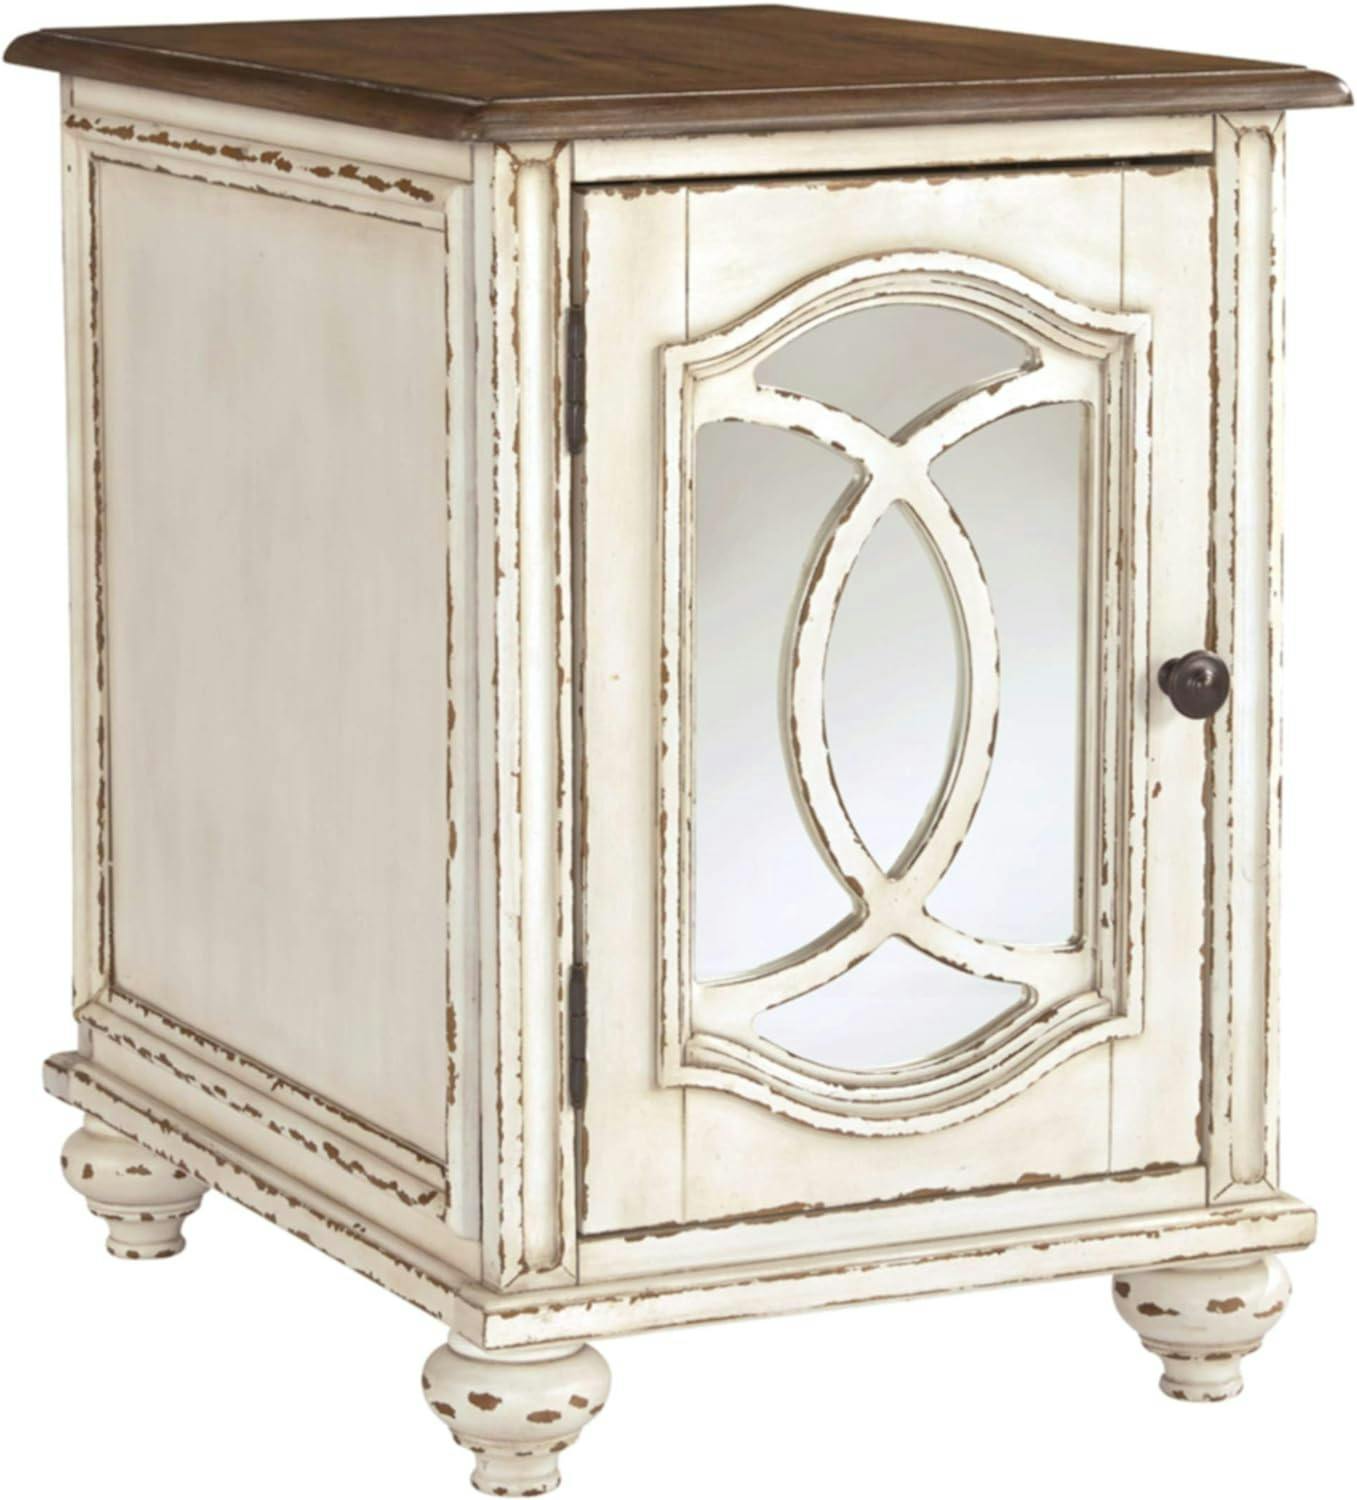 Antiqued Two-Tone Mirrored Cottage End Table with Storage